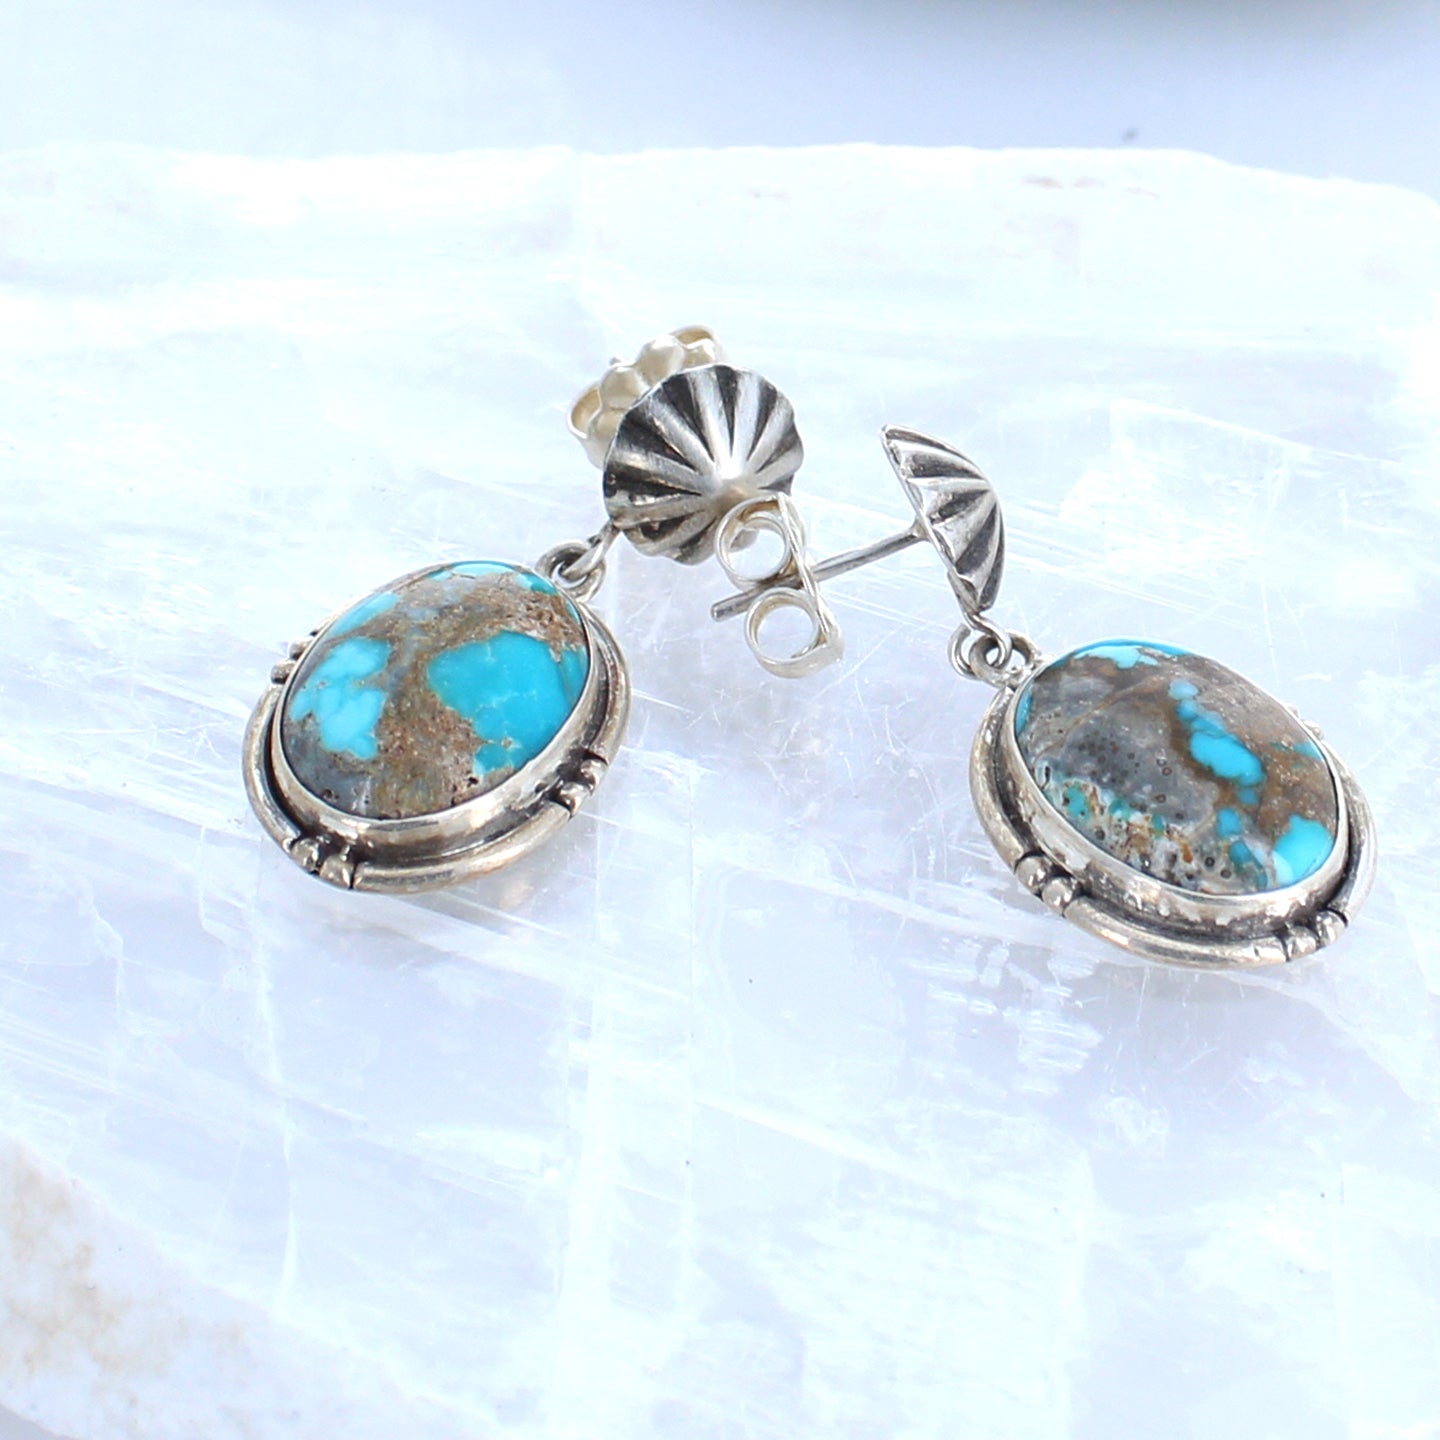 Carico Lake Turquoise Earrings Sterling Silver Blue Red Matrix Ovals -NewWorldGems